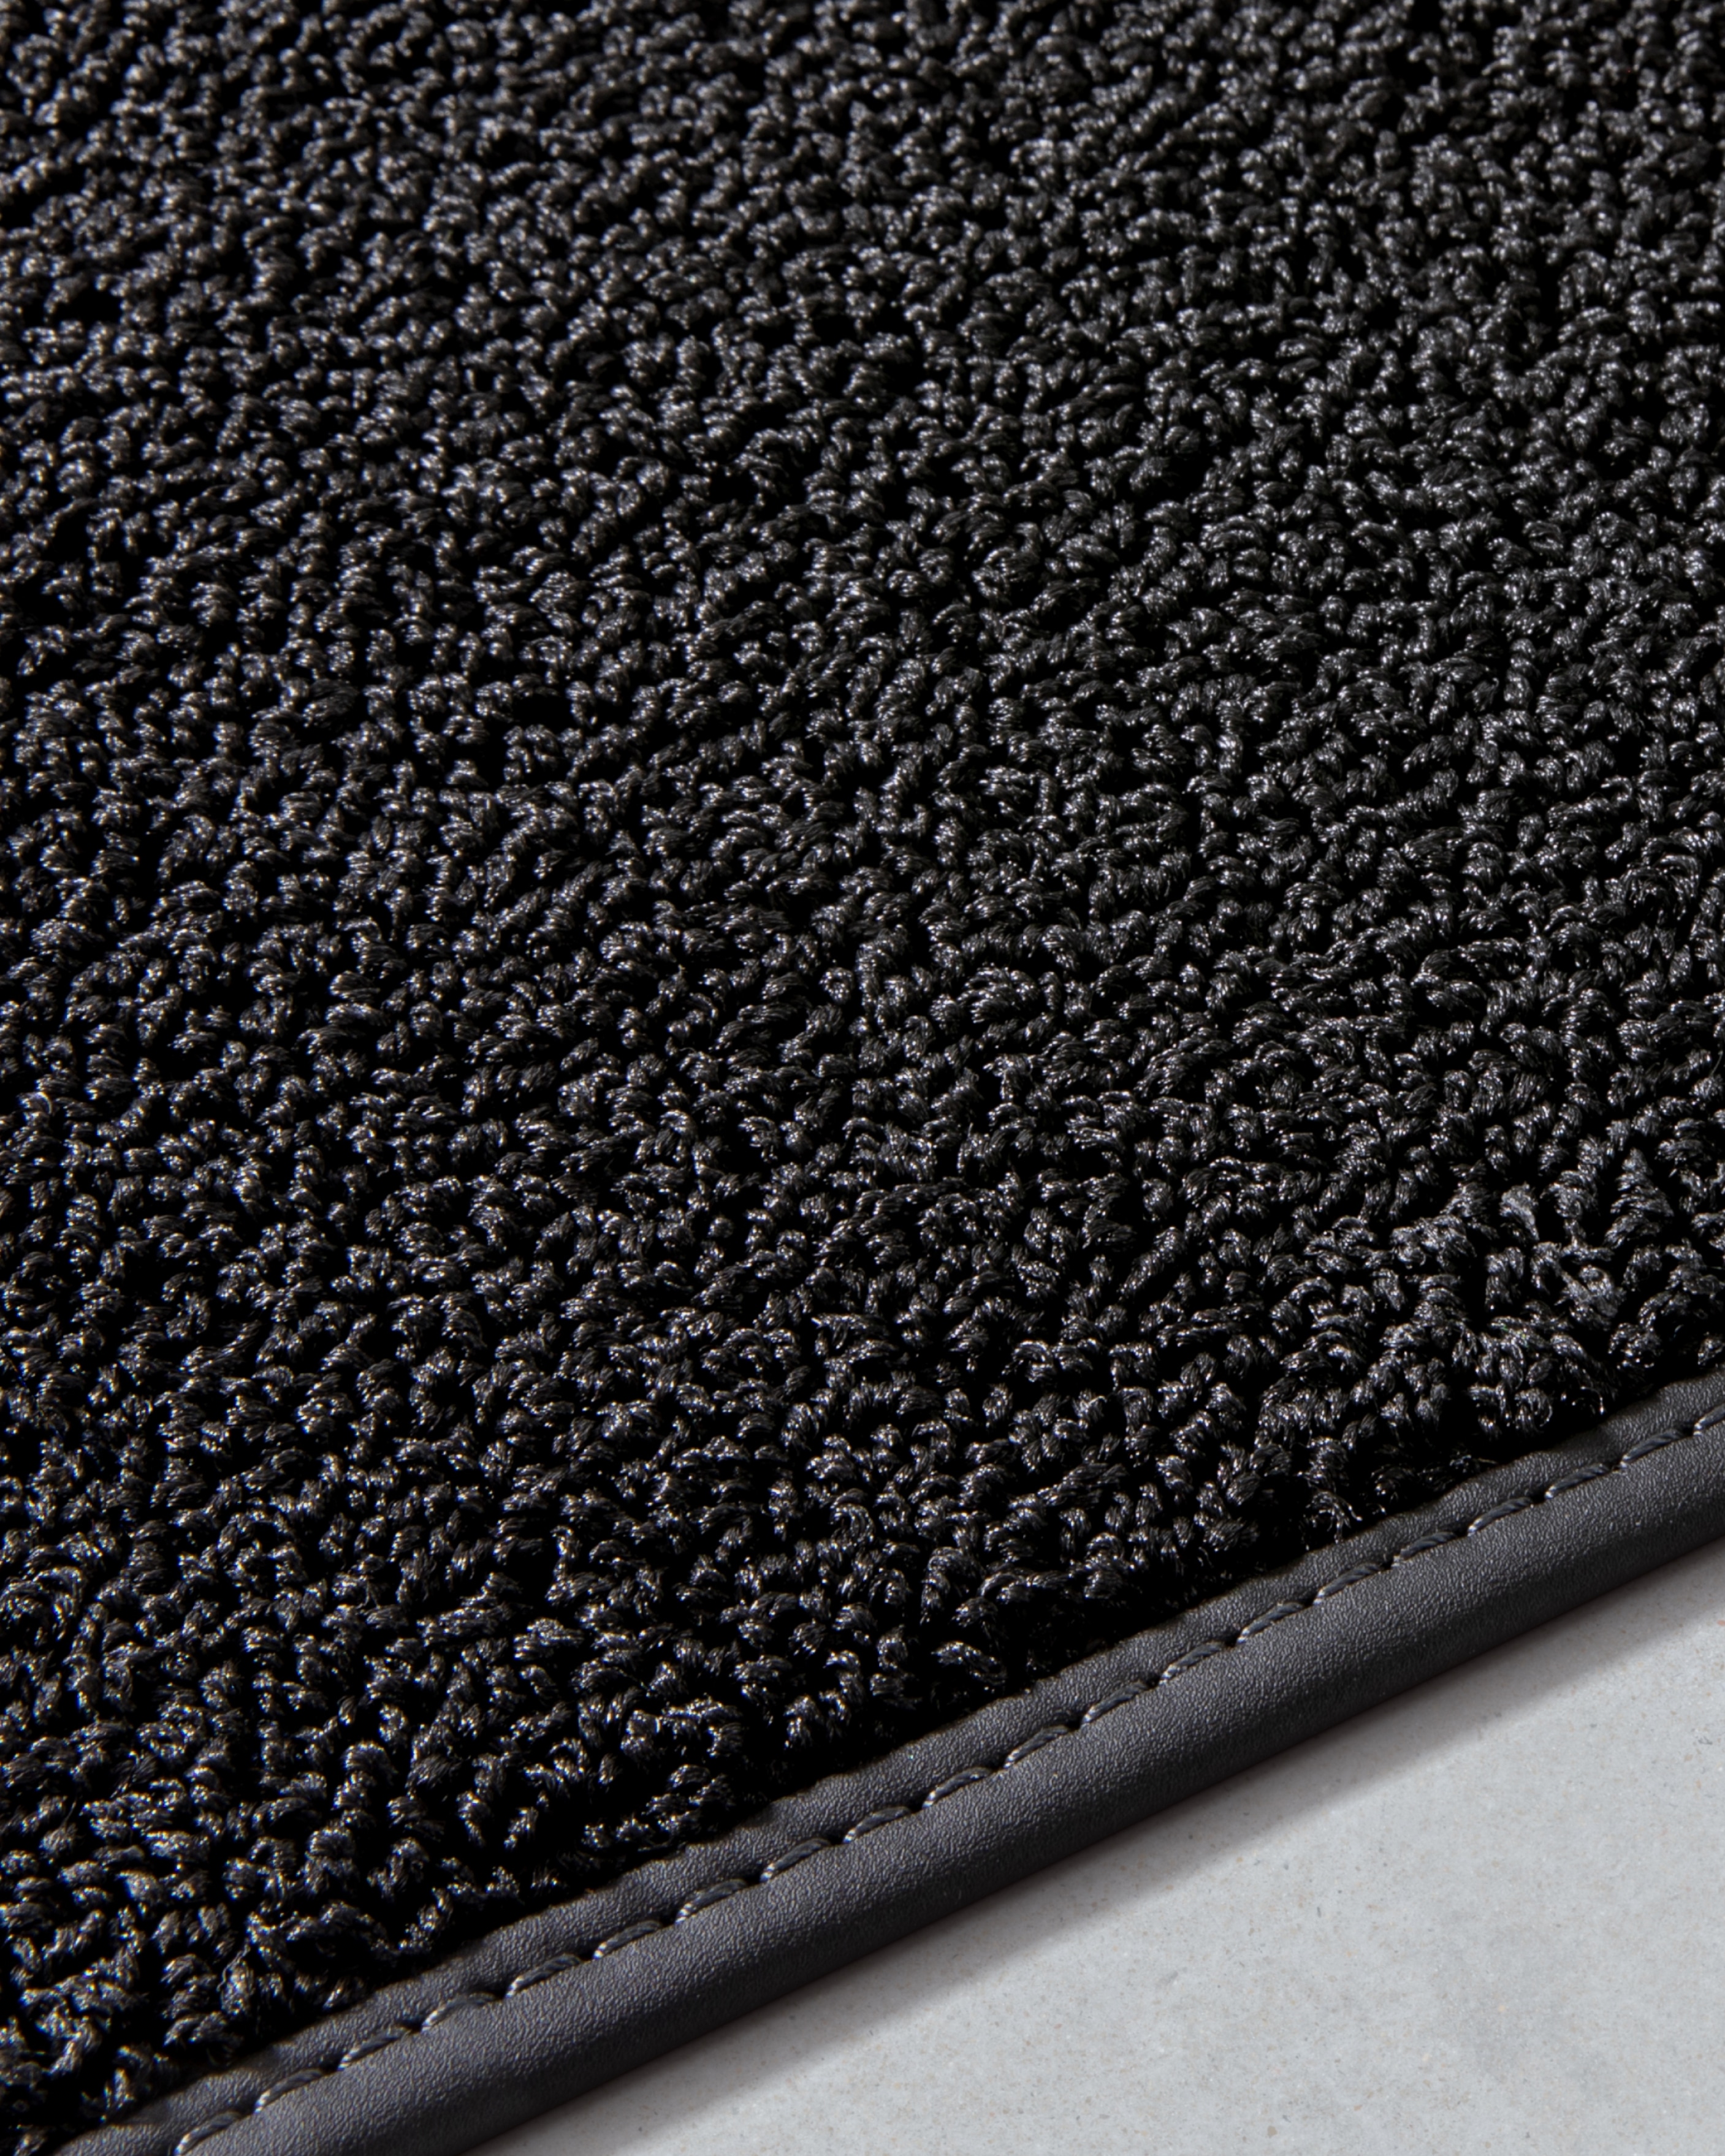 Image of the Volvo EX30's textile inlay mats made partially from fish net and inspired by rain drops.